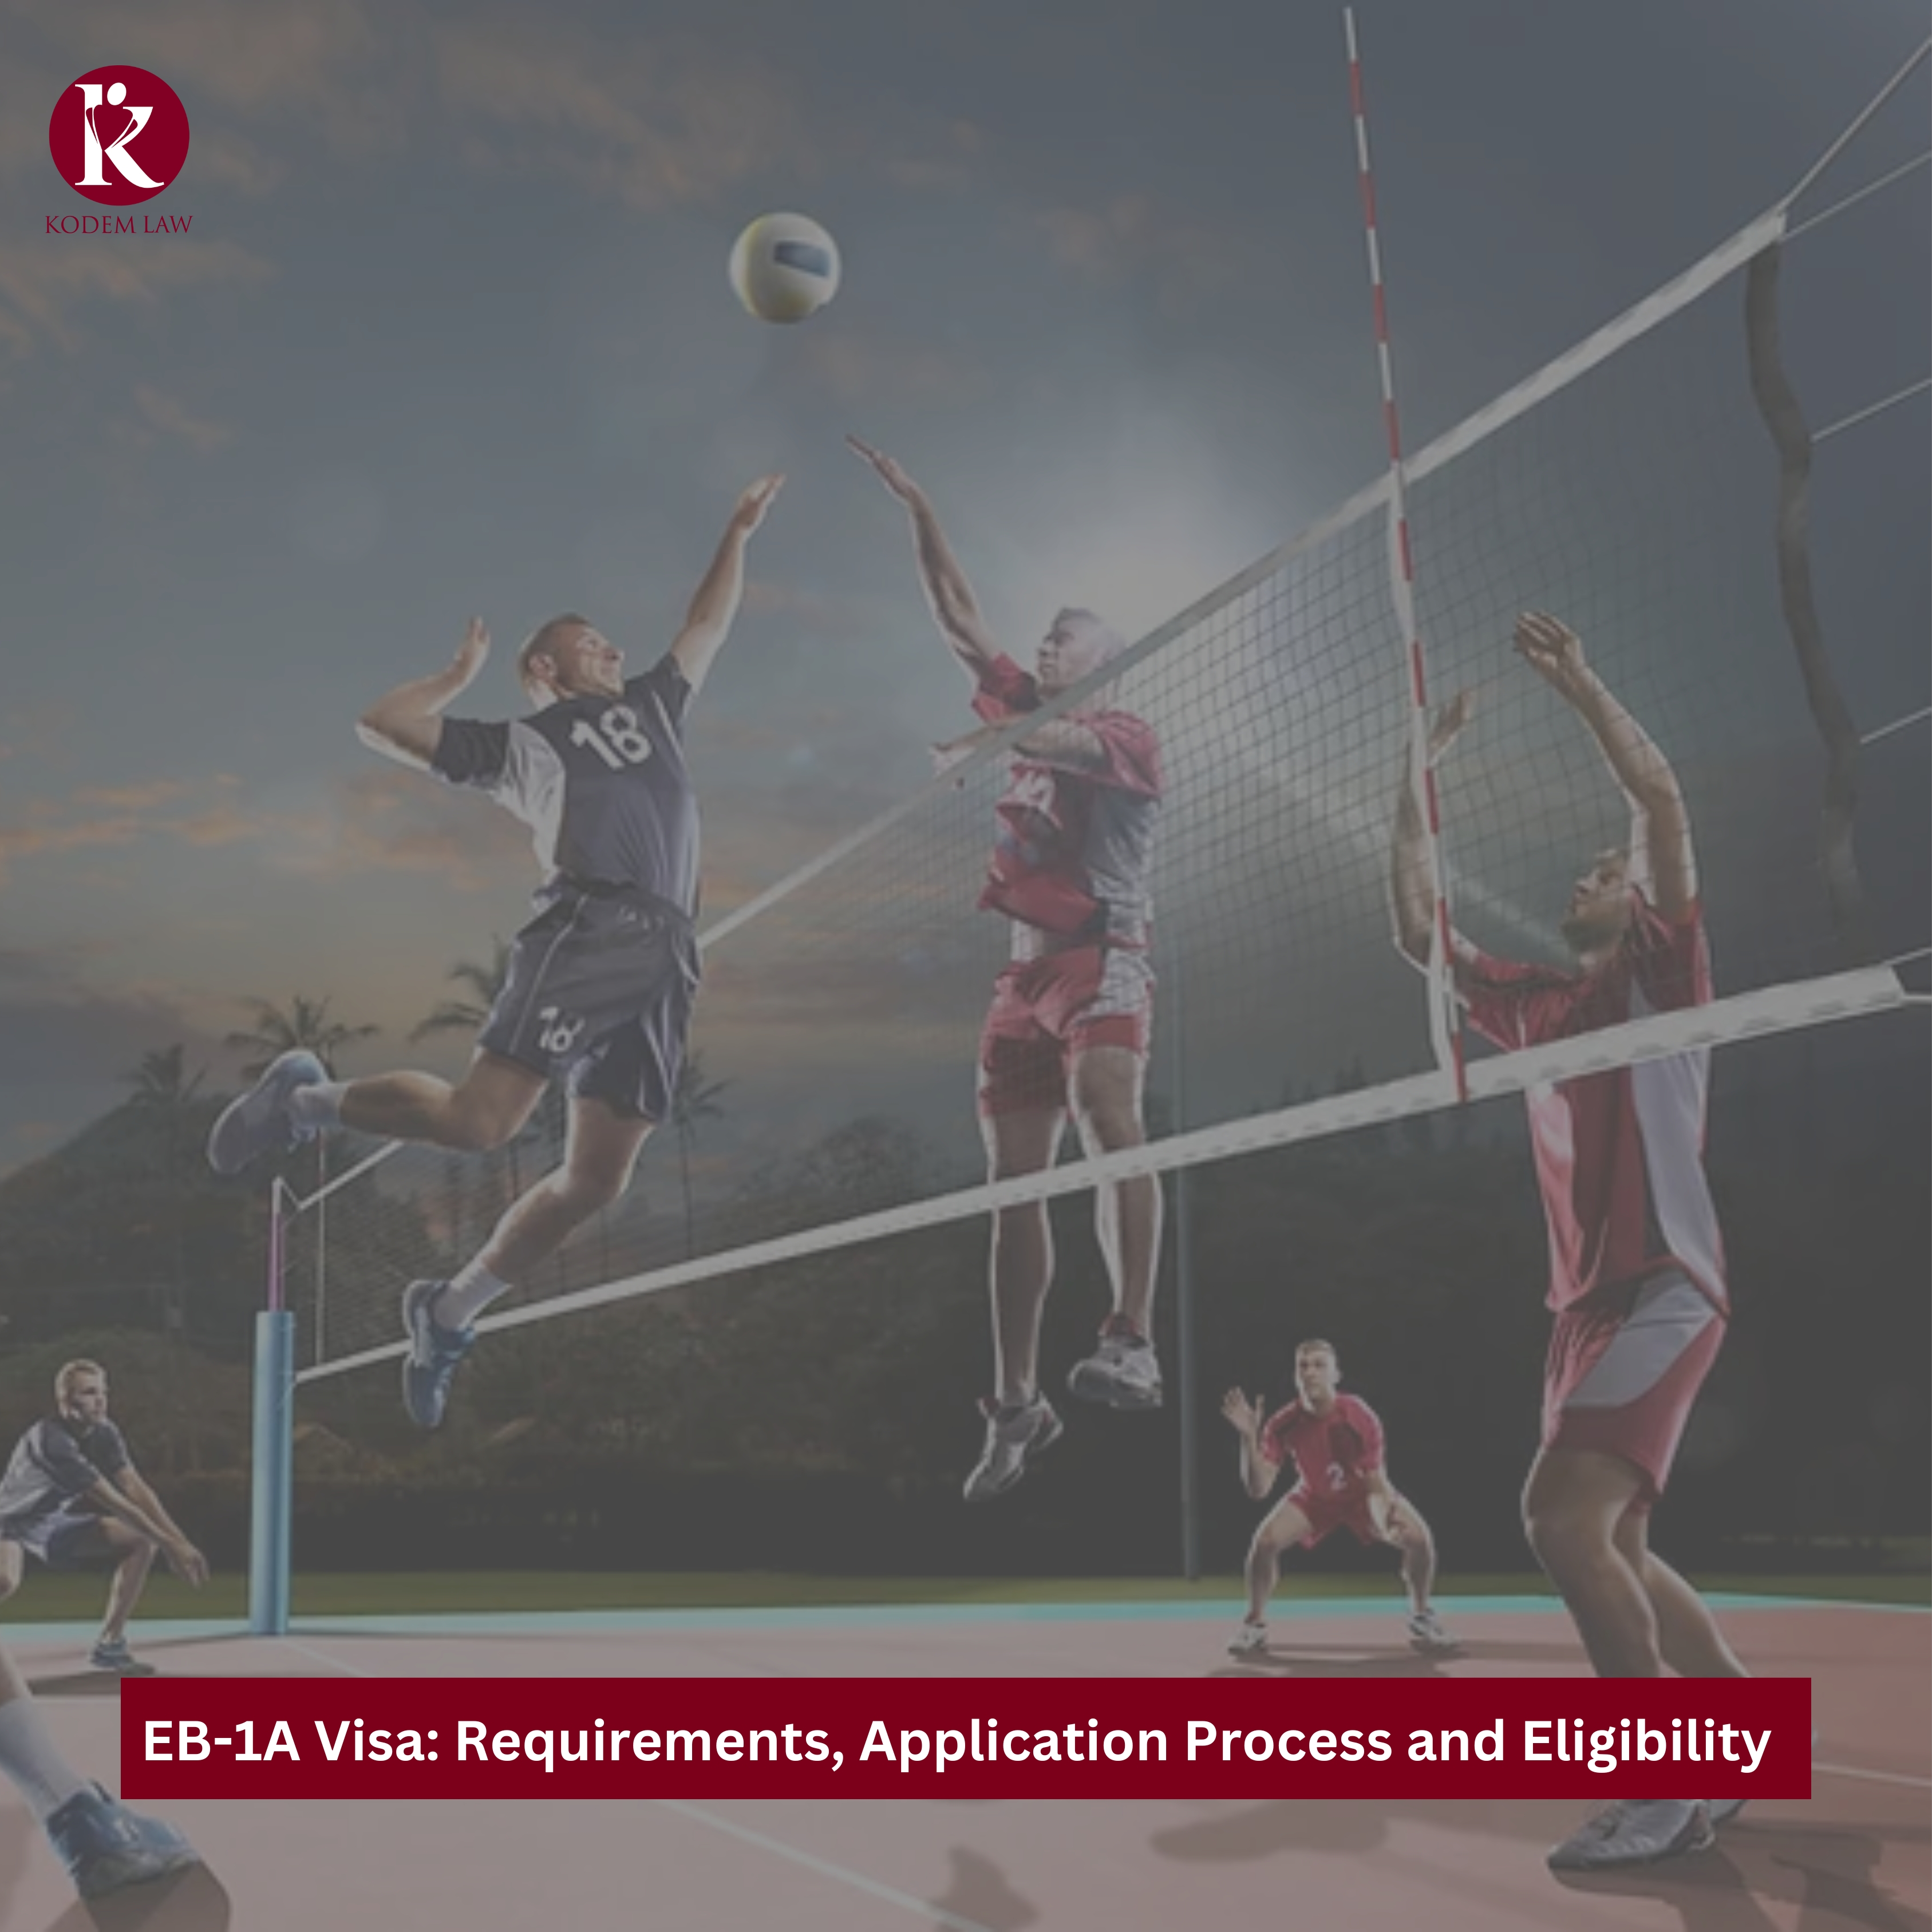 EB-1A Visa Requirements, Application Process and Eligibility